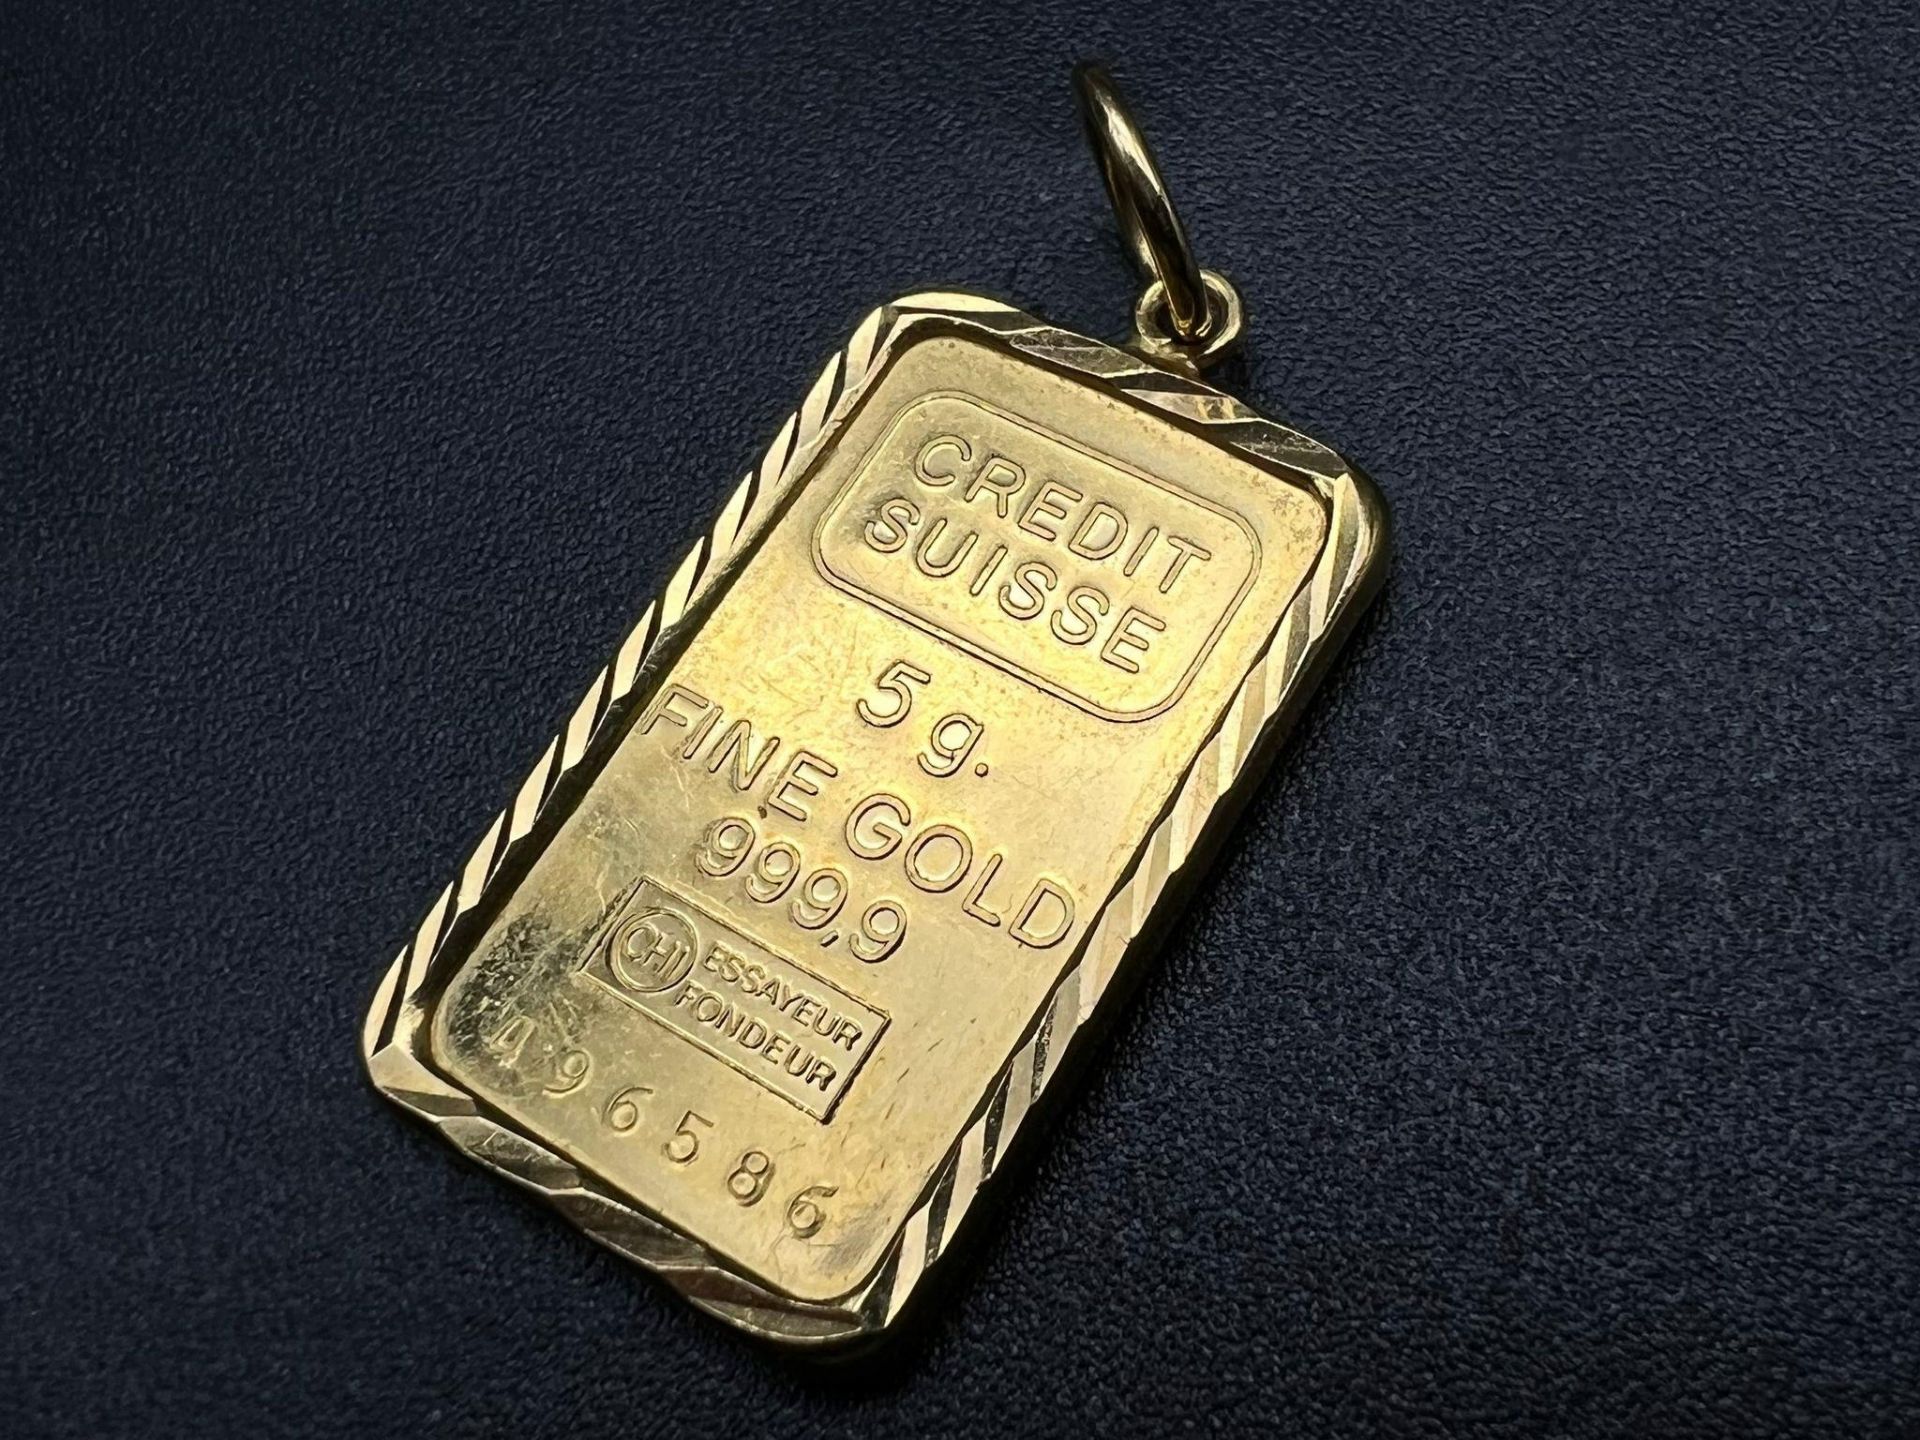 A 5g Fine Gold (.999.9) Pendant - Frame set in 14k Gold. Total weight - 5.9g.